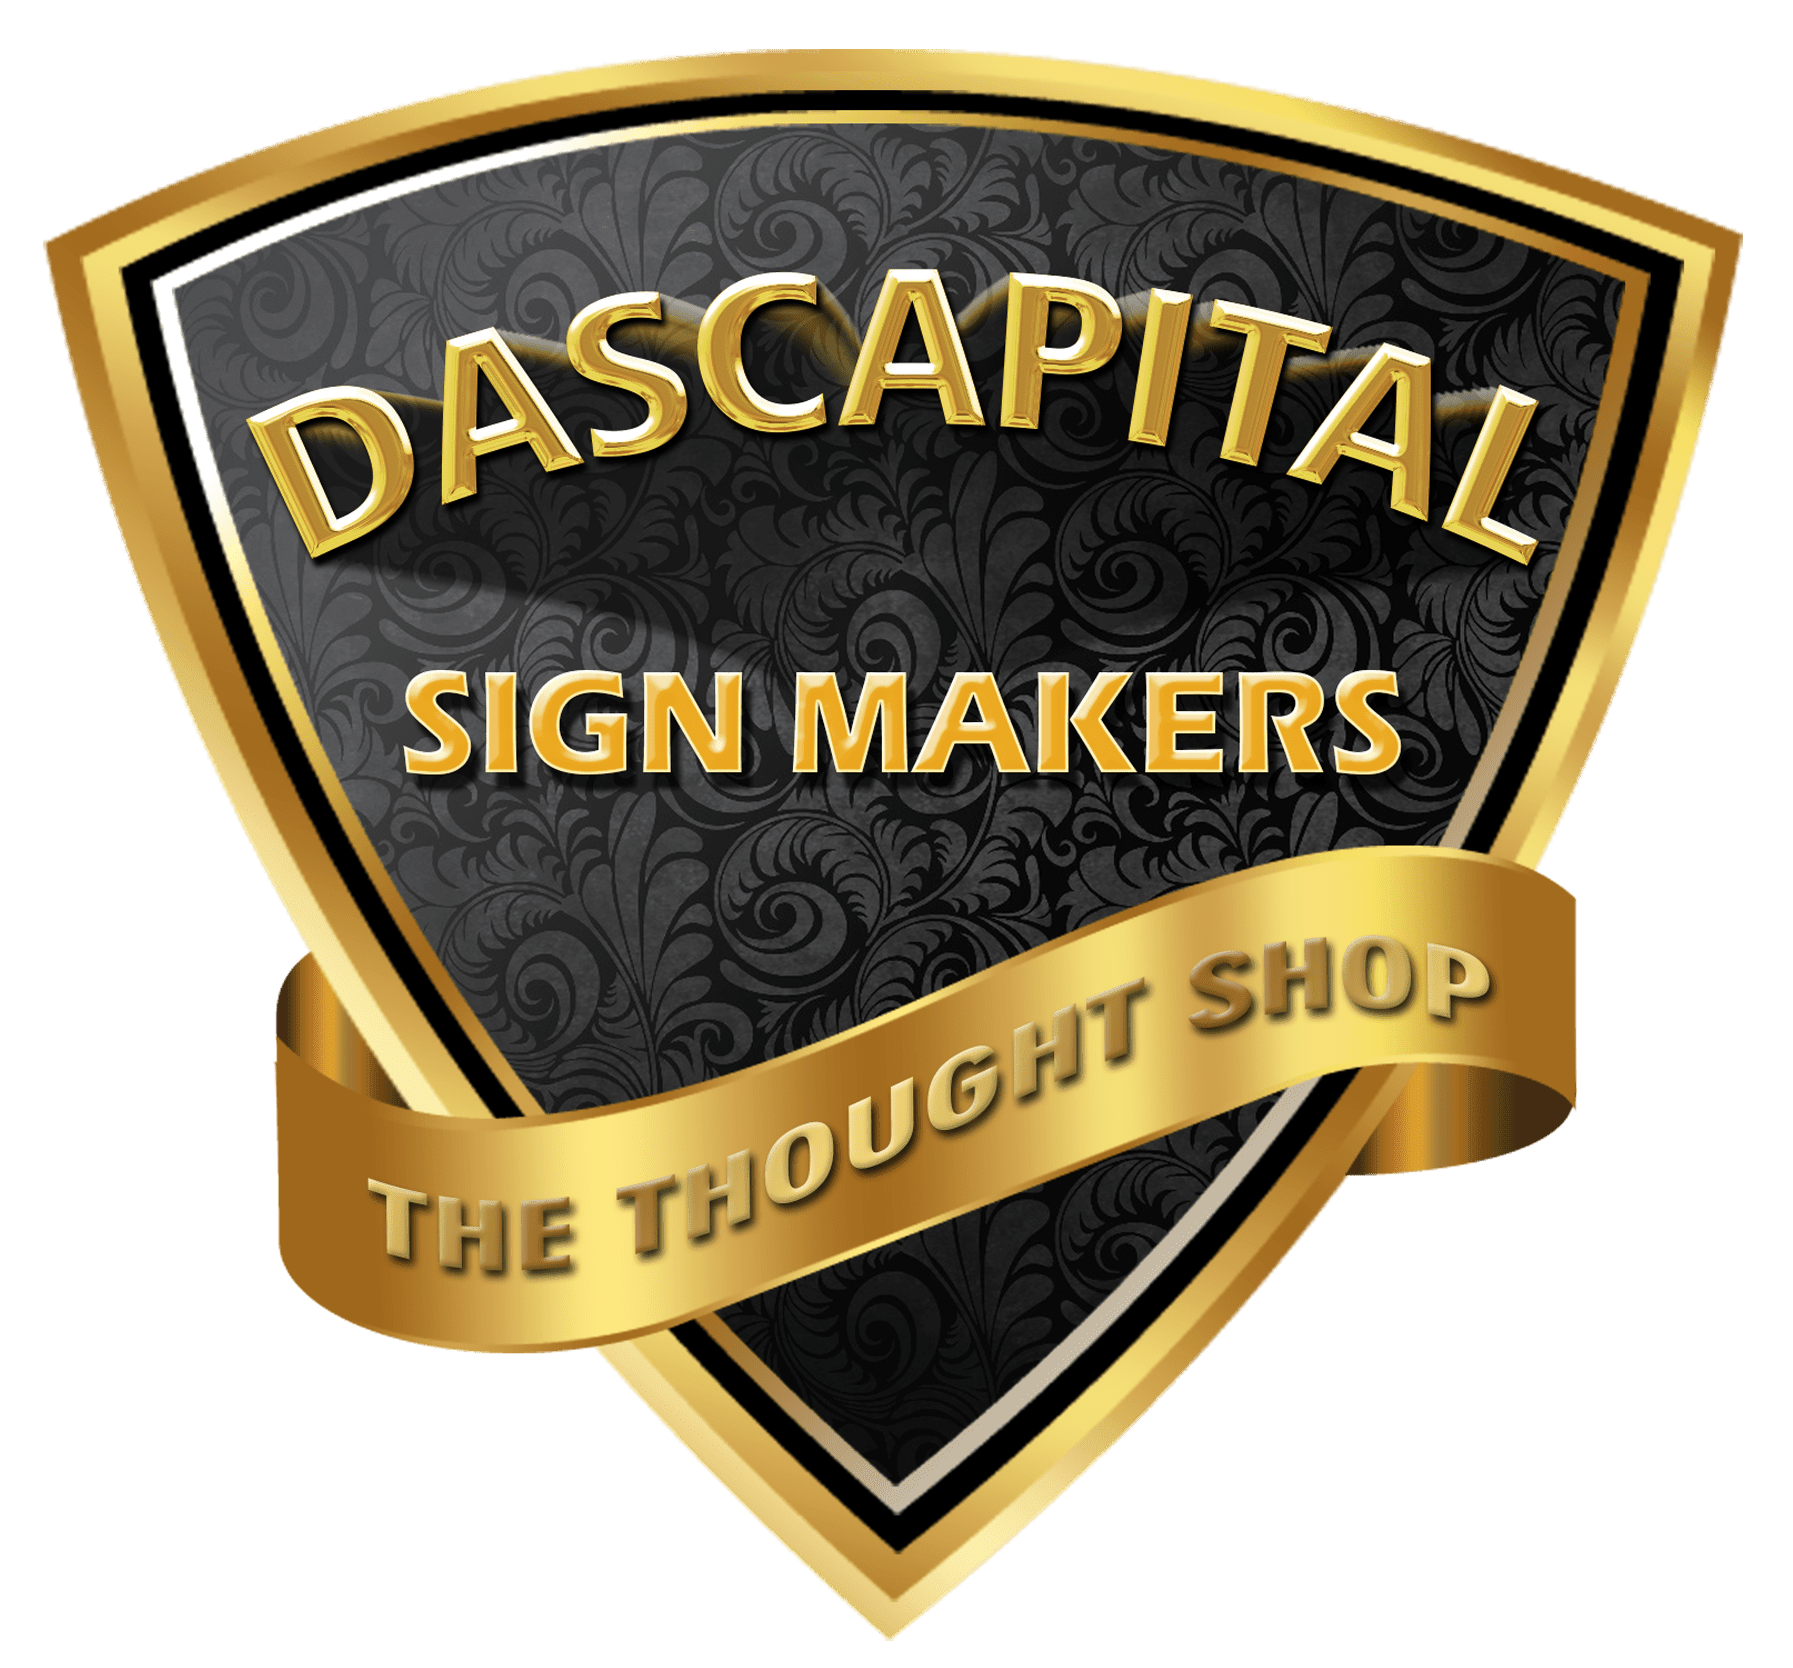 Dascapital Sign Makers